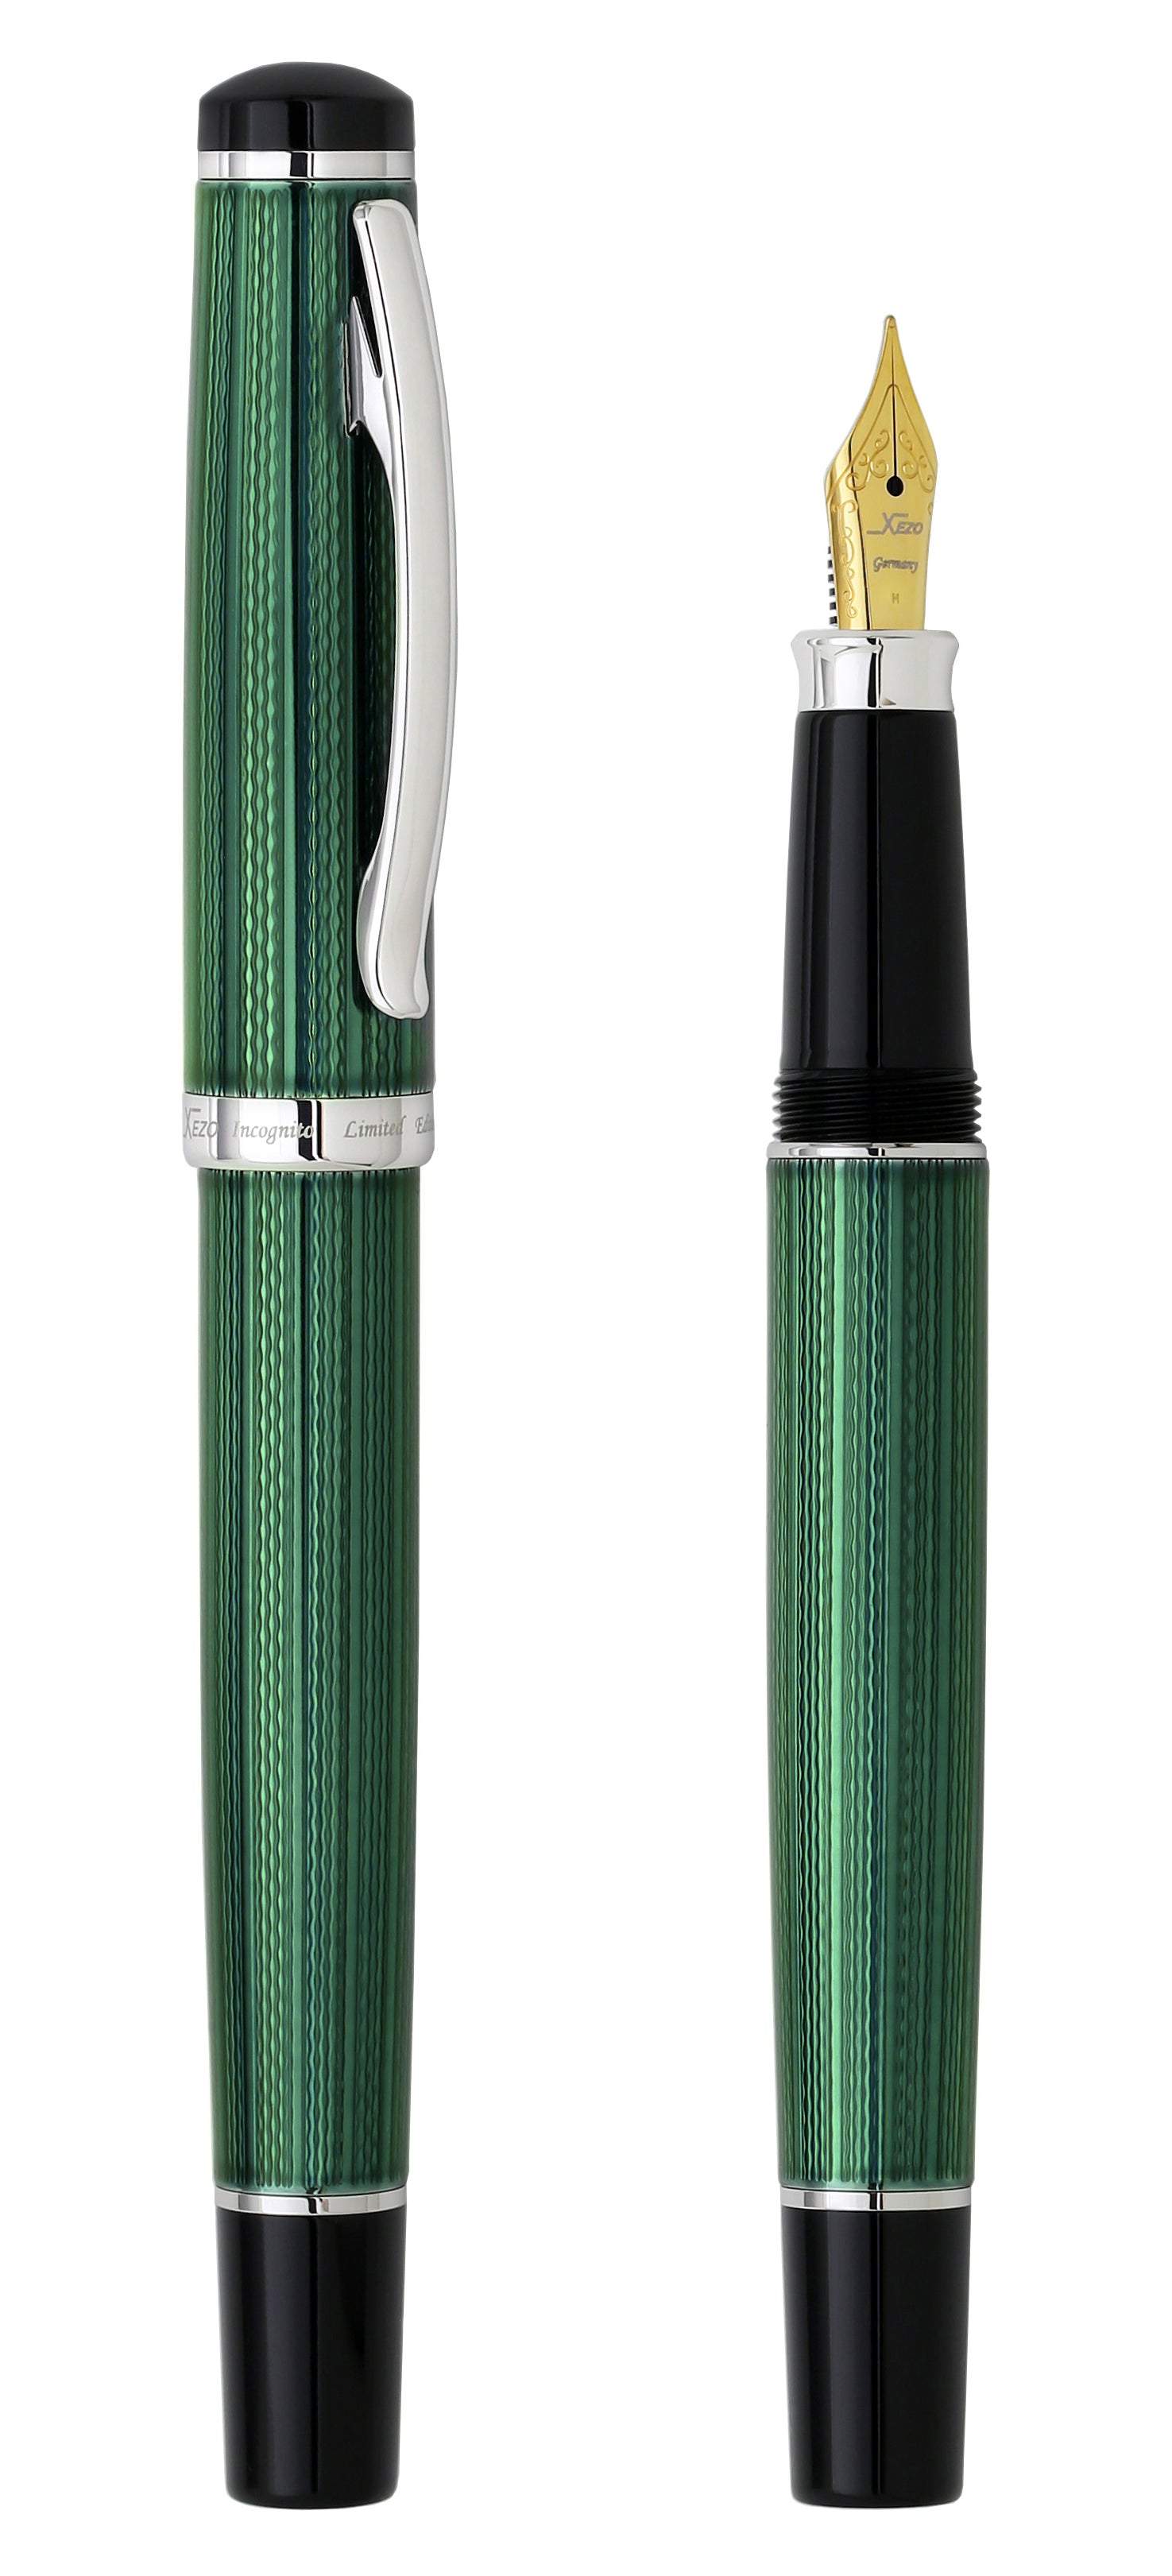 Xezo - Comparison between the angled view of the capped and uncapped Incognito Forest FM fountain pens